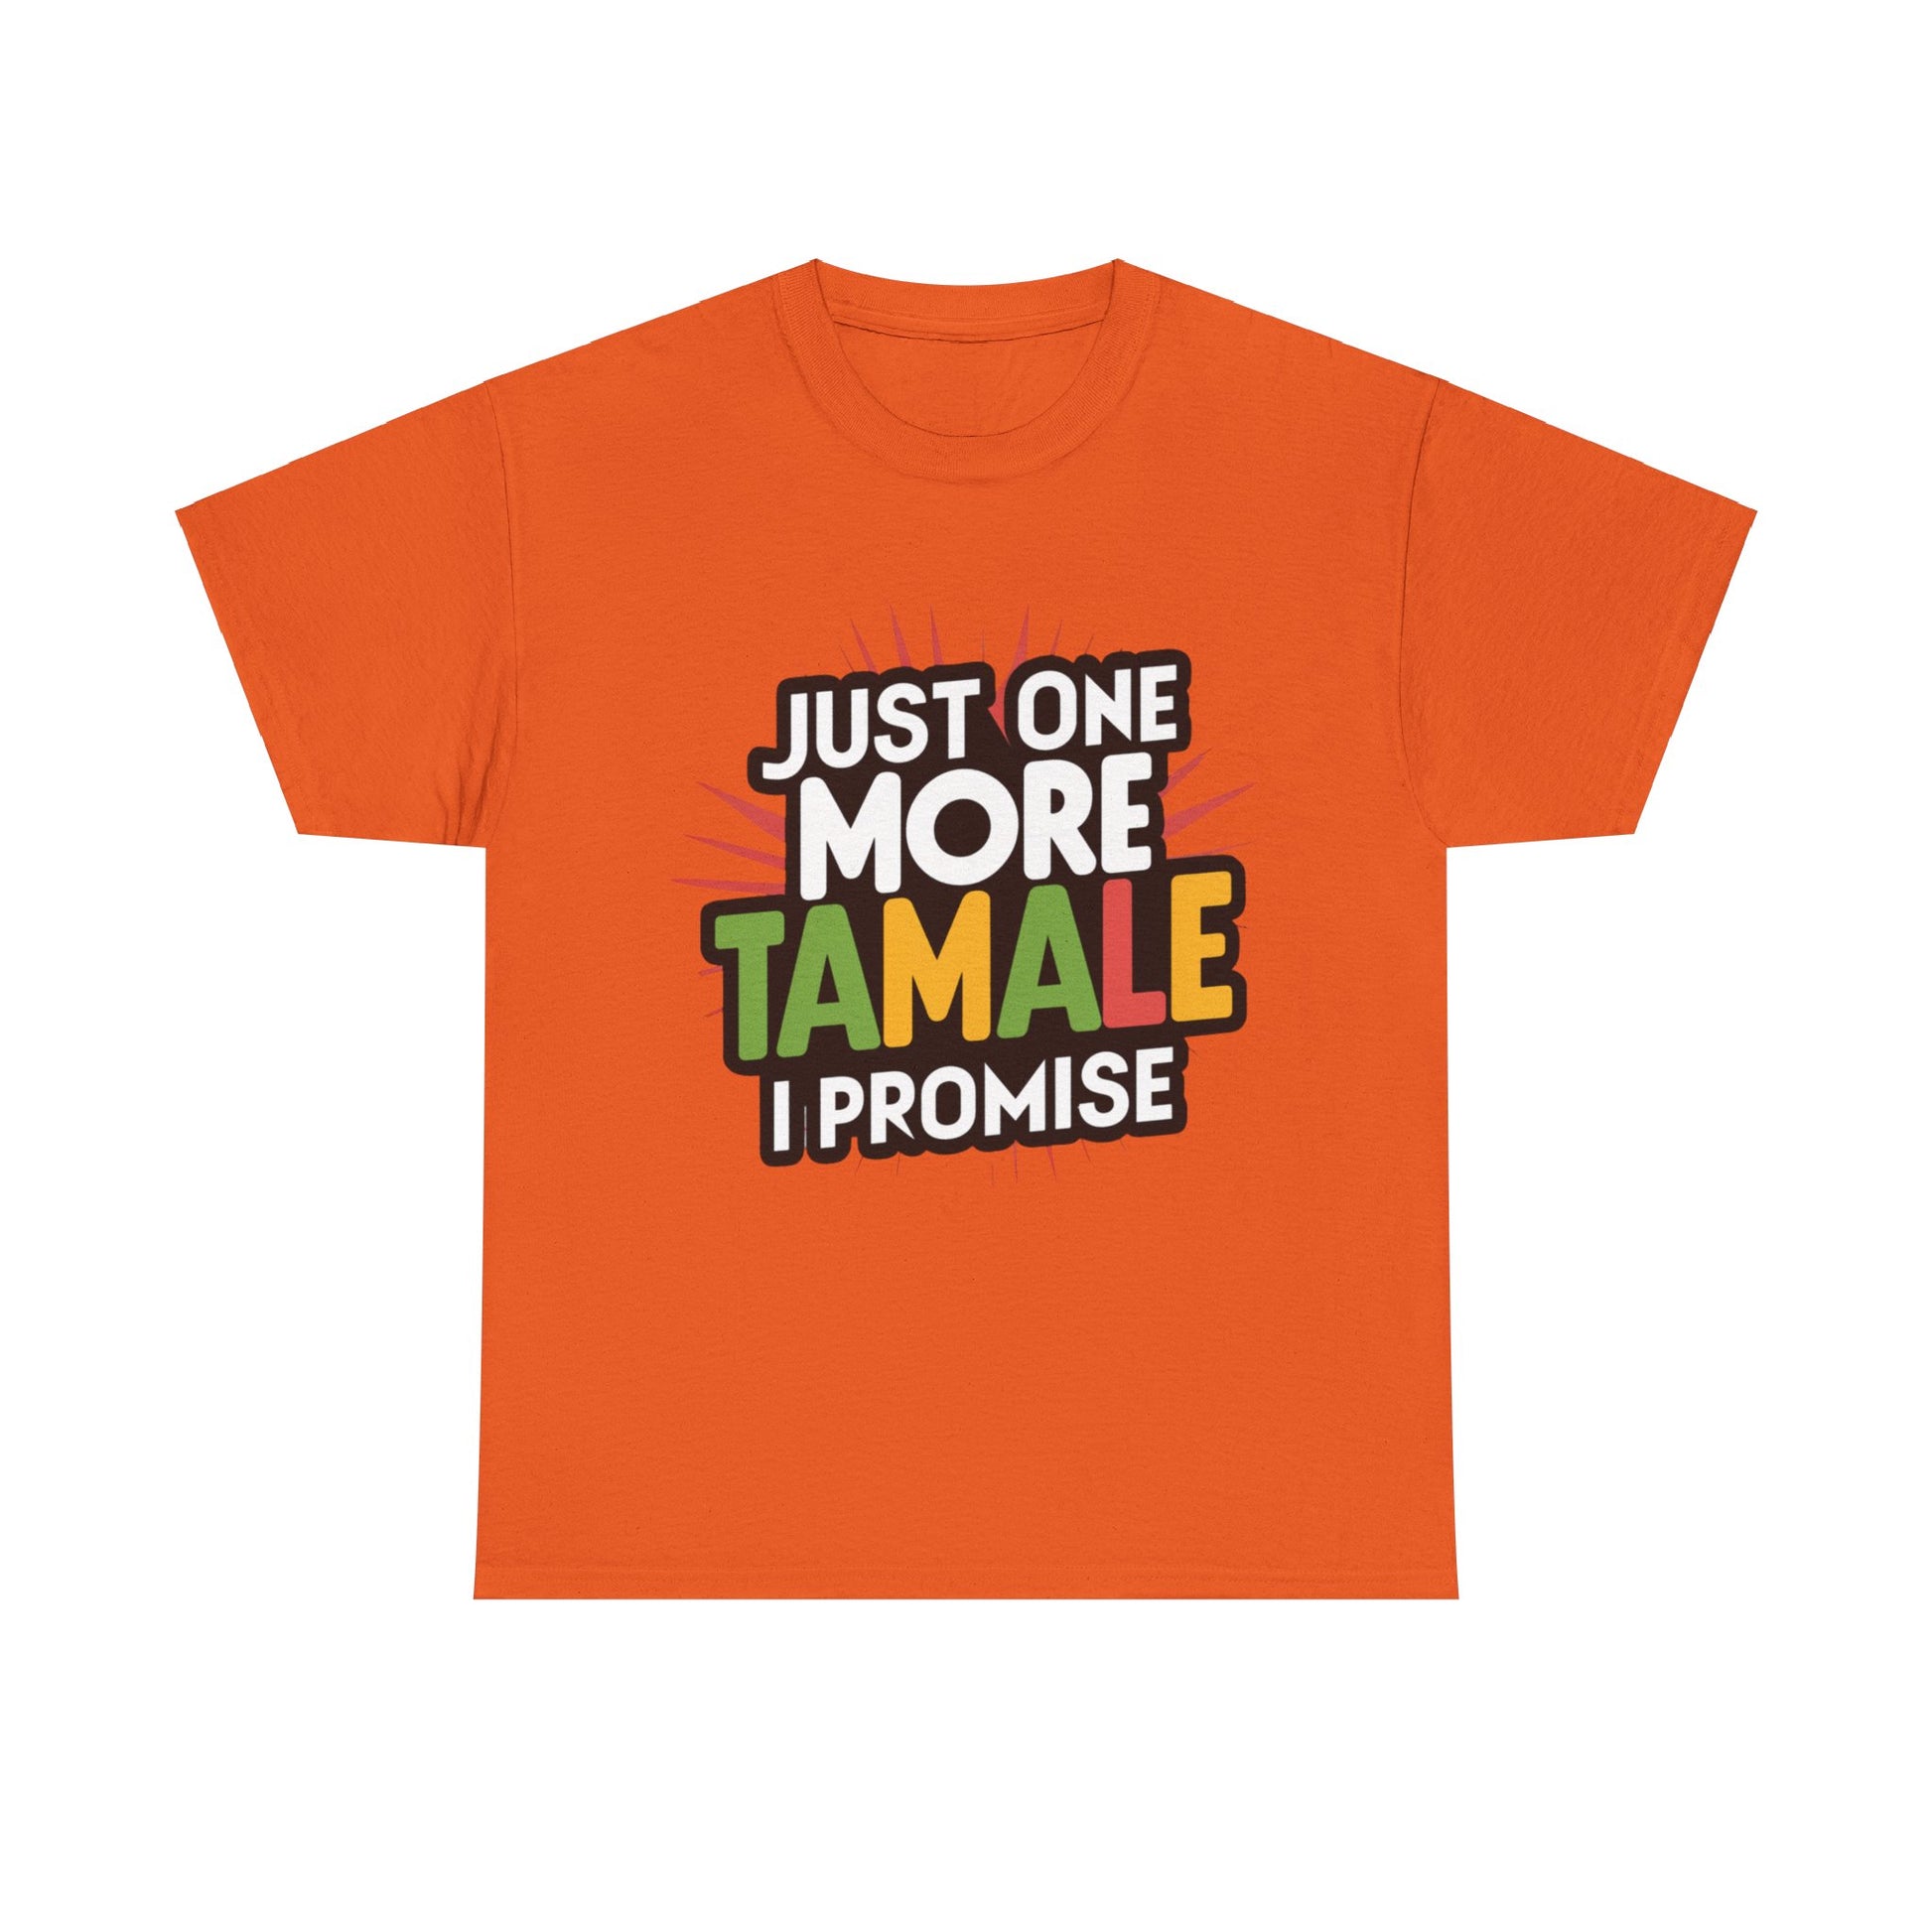 Just One More Tamale I Promise Mexican Food Graphic Unisex Heavy Cotton Tee Cotton Funny Humorous Graphic Soft Premium Unisex Men Women Orange T-shirt Birthday Gift-6